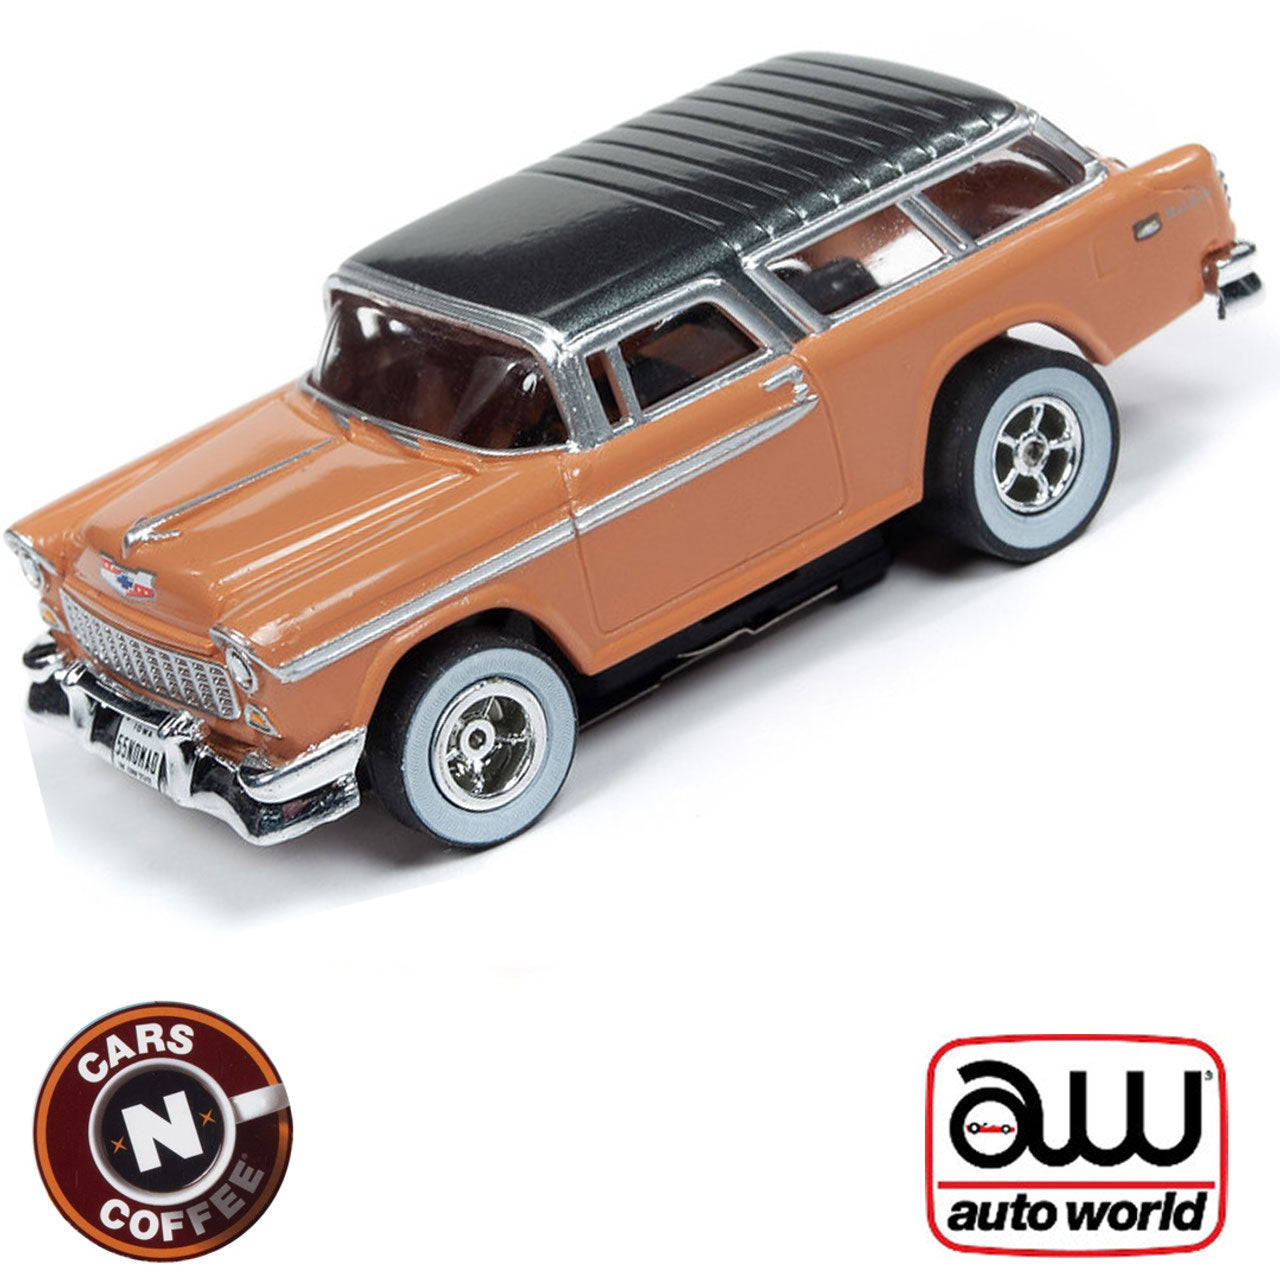 Auto World 1955 Chevy Nomad Tan Xtraction R26 HO Slot Car SC341 for AFX